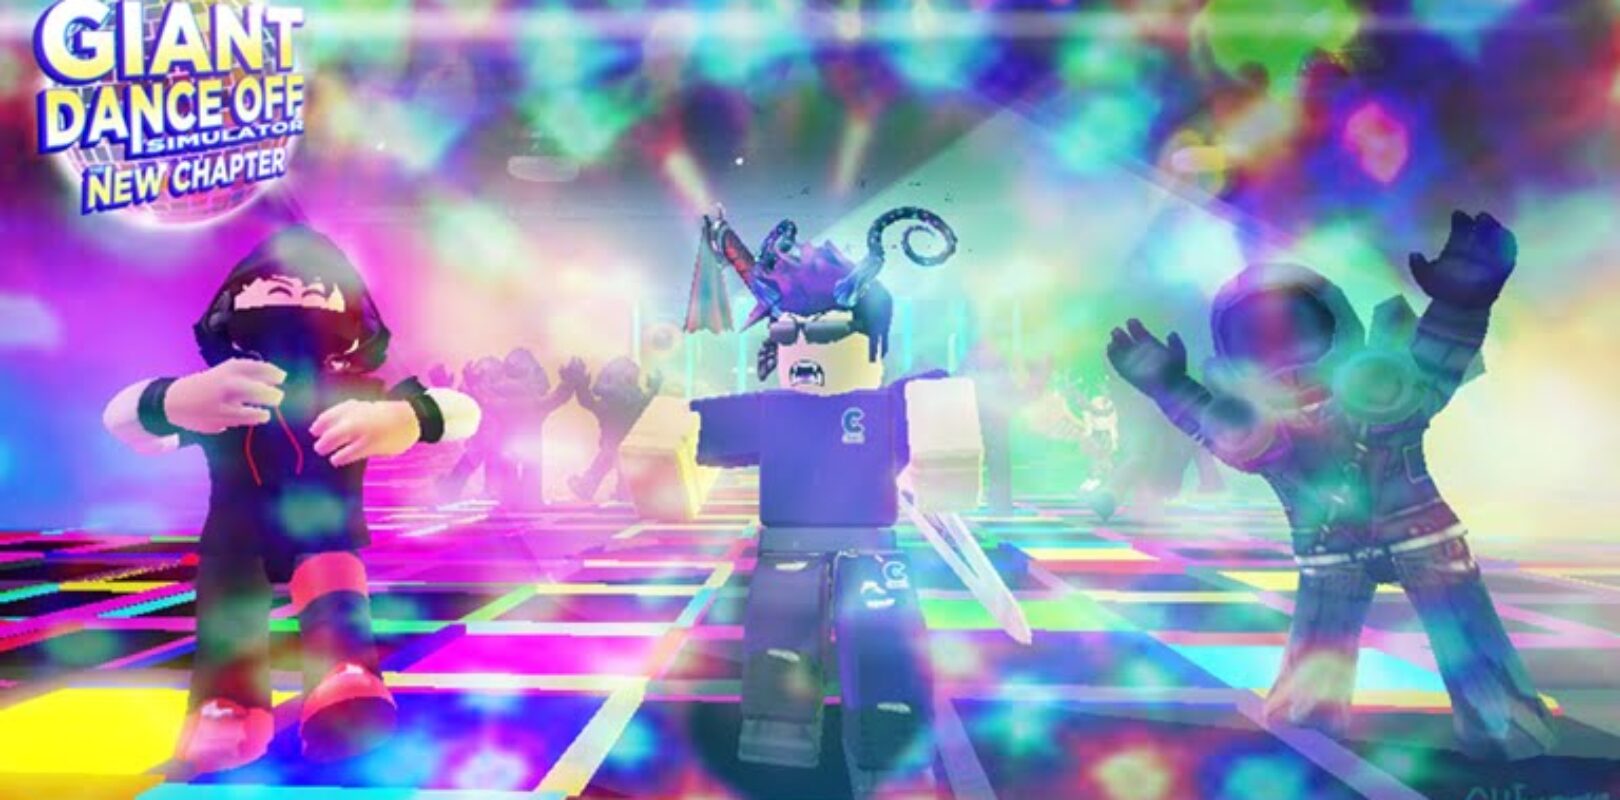 Giant Dance Off Simulator Codes 2020 Pivotal Gamers - roblox giant dance off simulator codes list